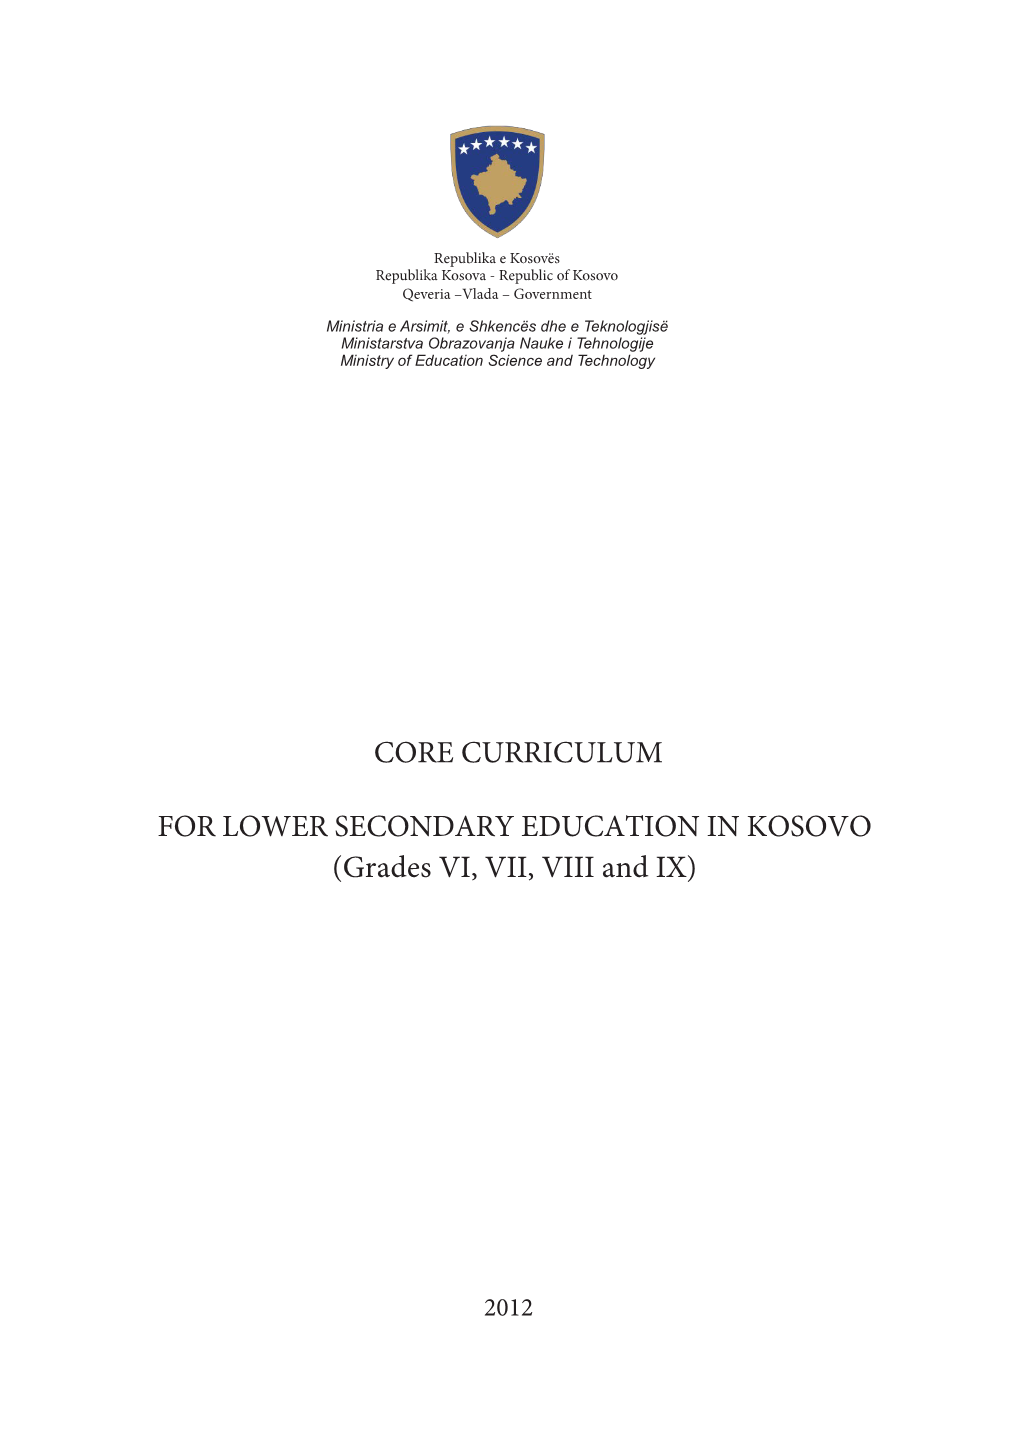 Core Curriculum for Lower Secondary Education in Kosovo